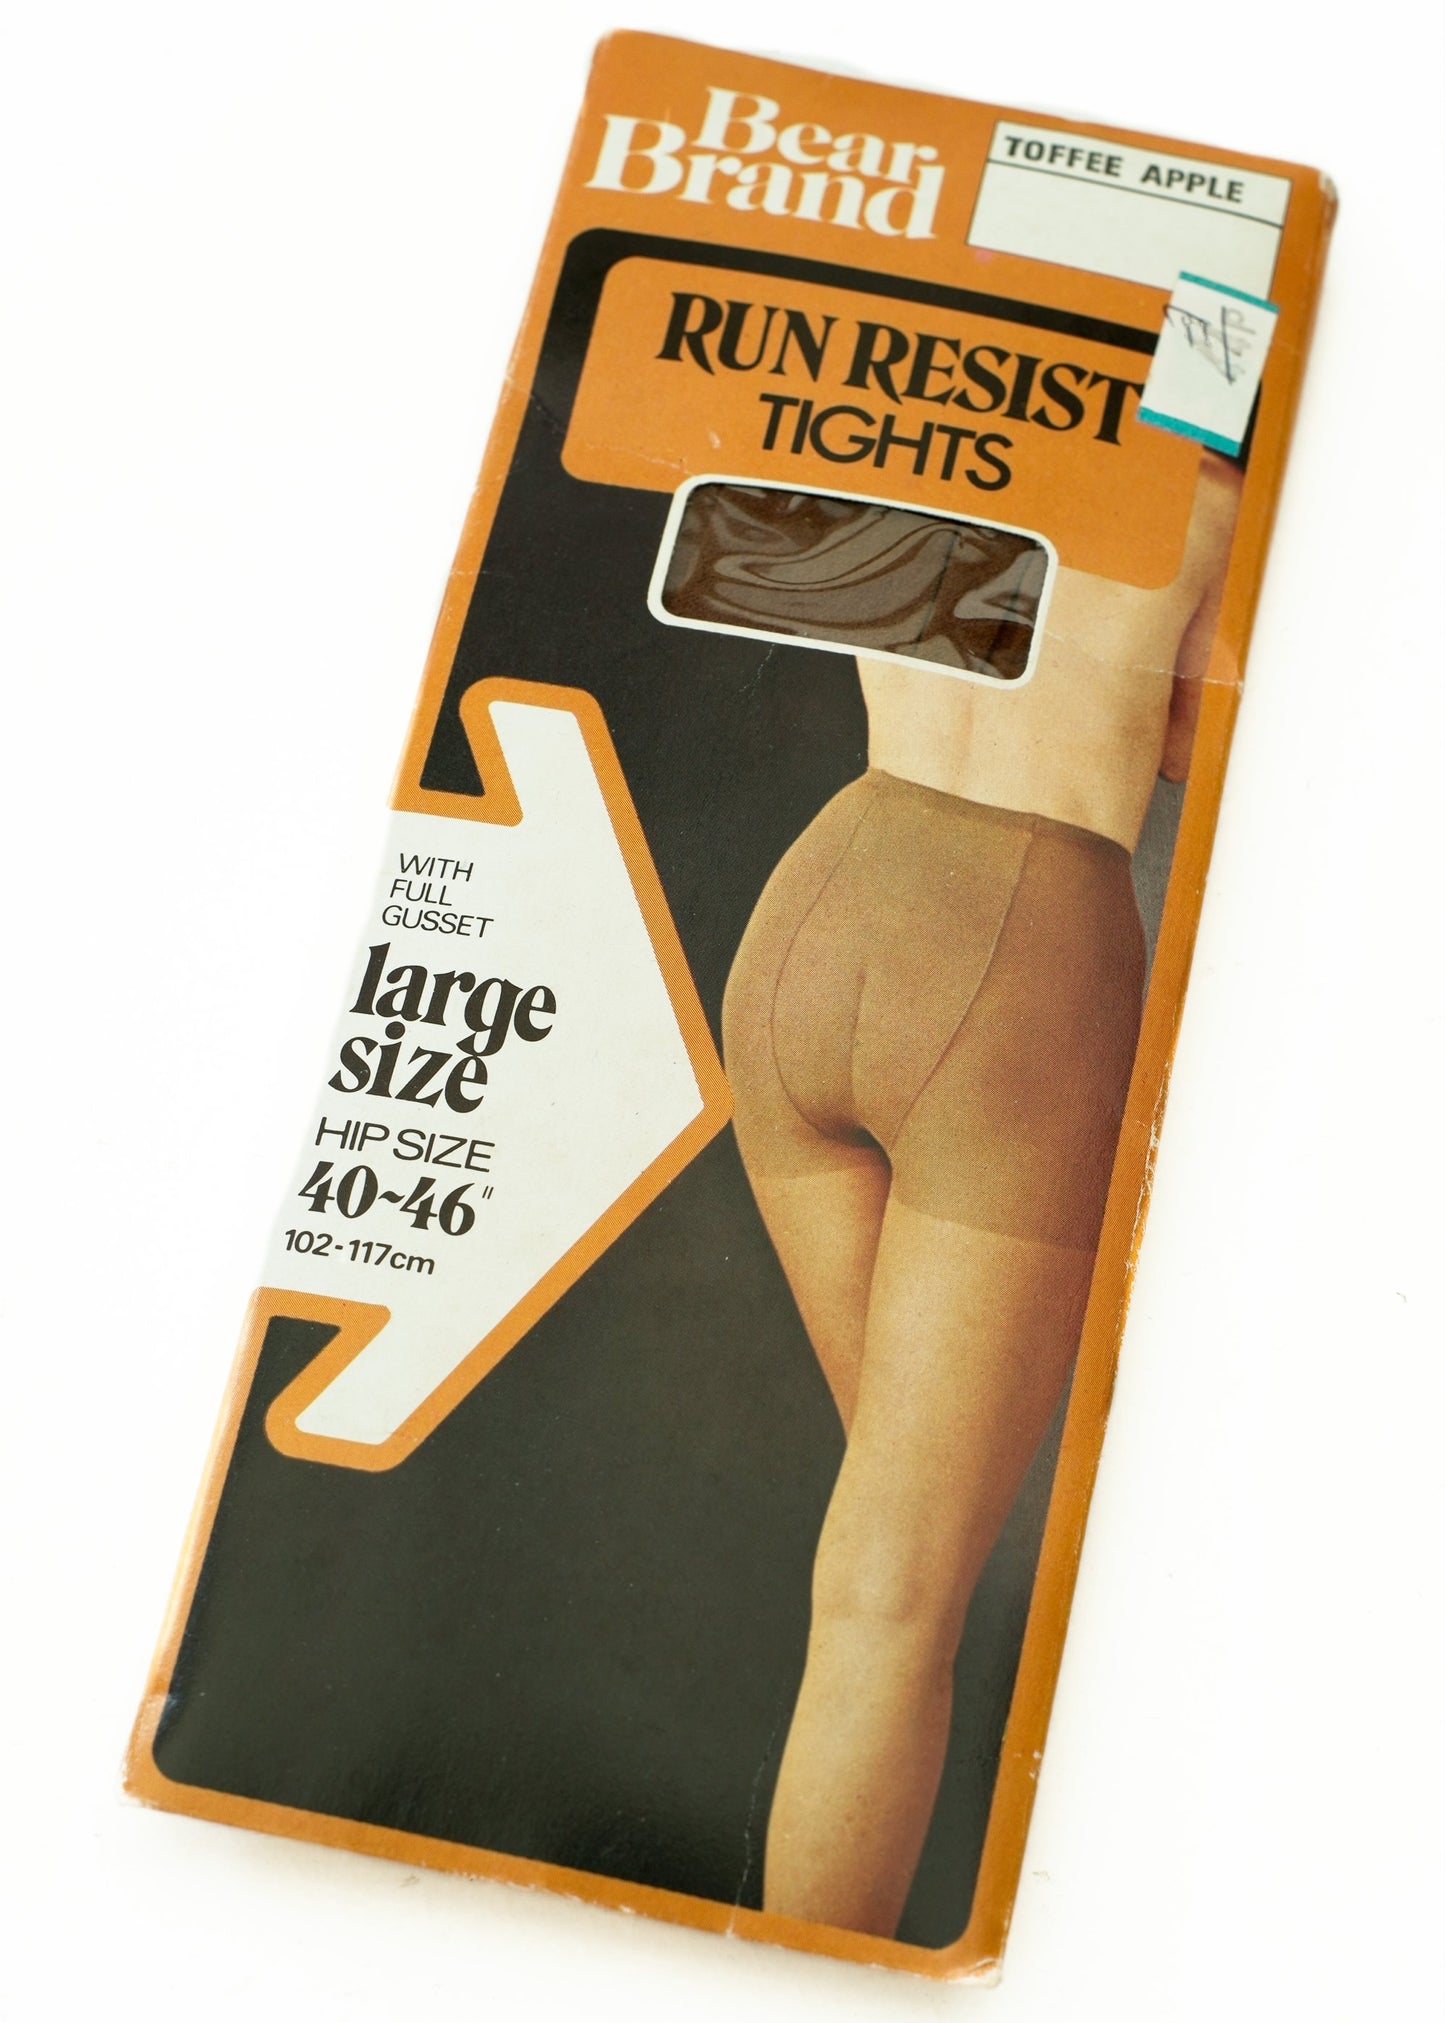 vintage 70s run resist tights by bear brand in colour toffee apple